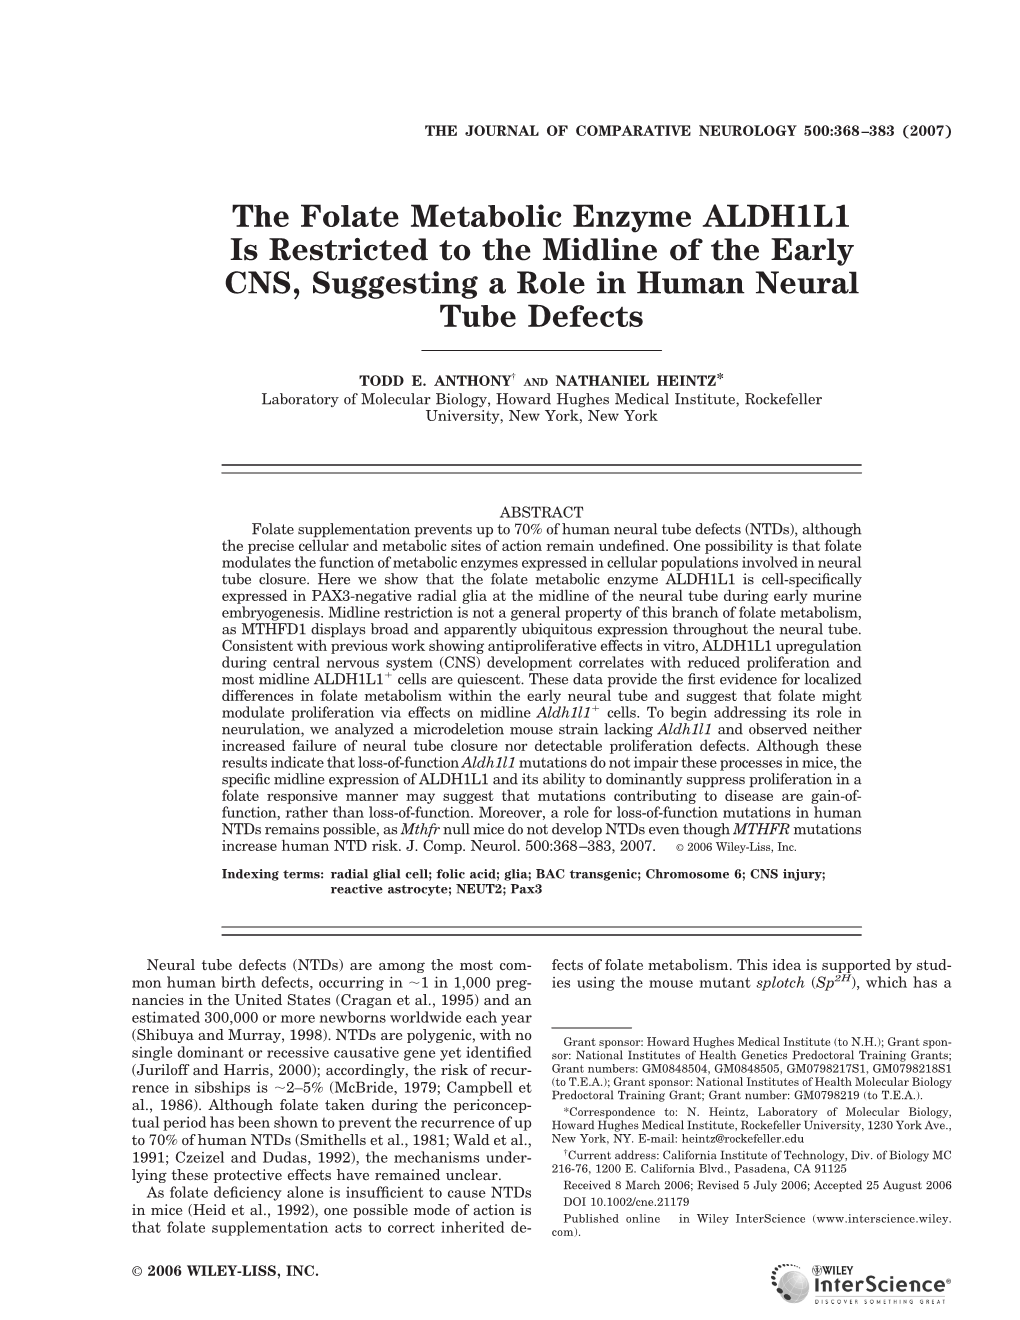 The Folate Metabolic Enzyme ALDH1L1 Is Restricted to the Midline of the Early CNS, Suggesting a Role in Human Neural Tube Defects